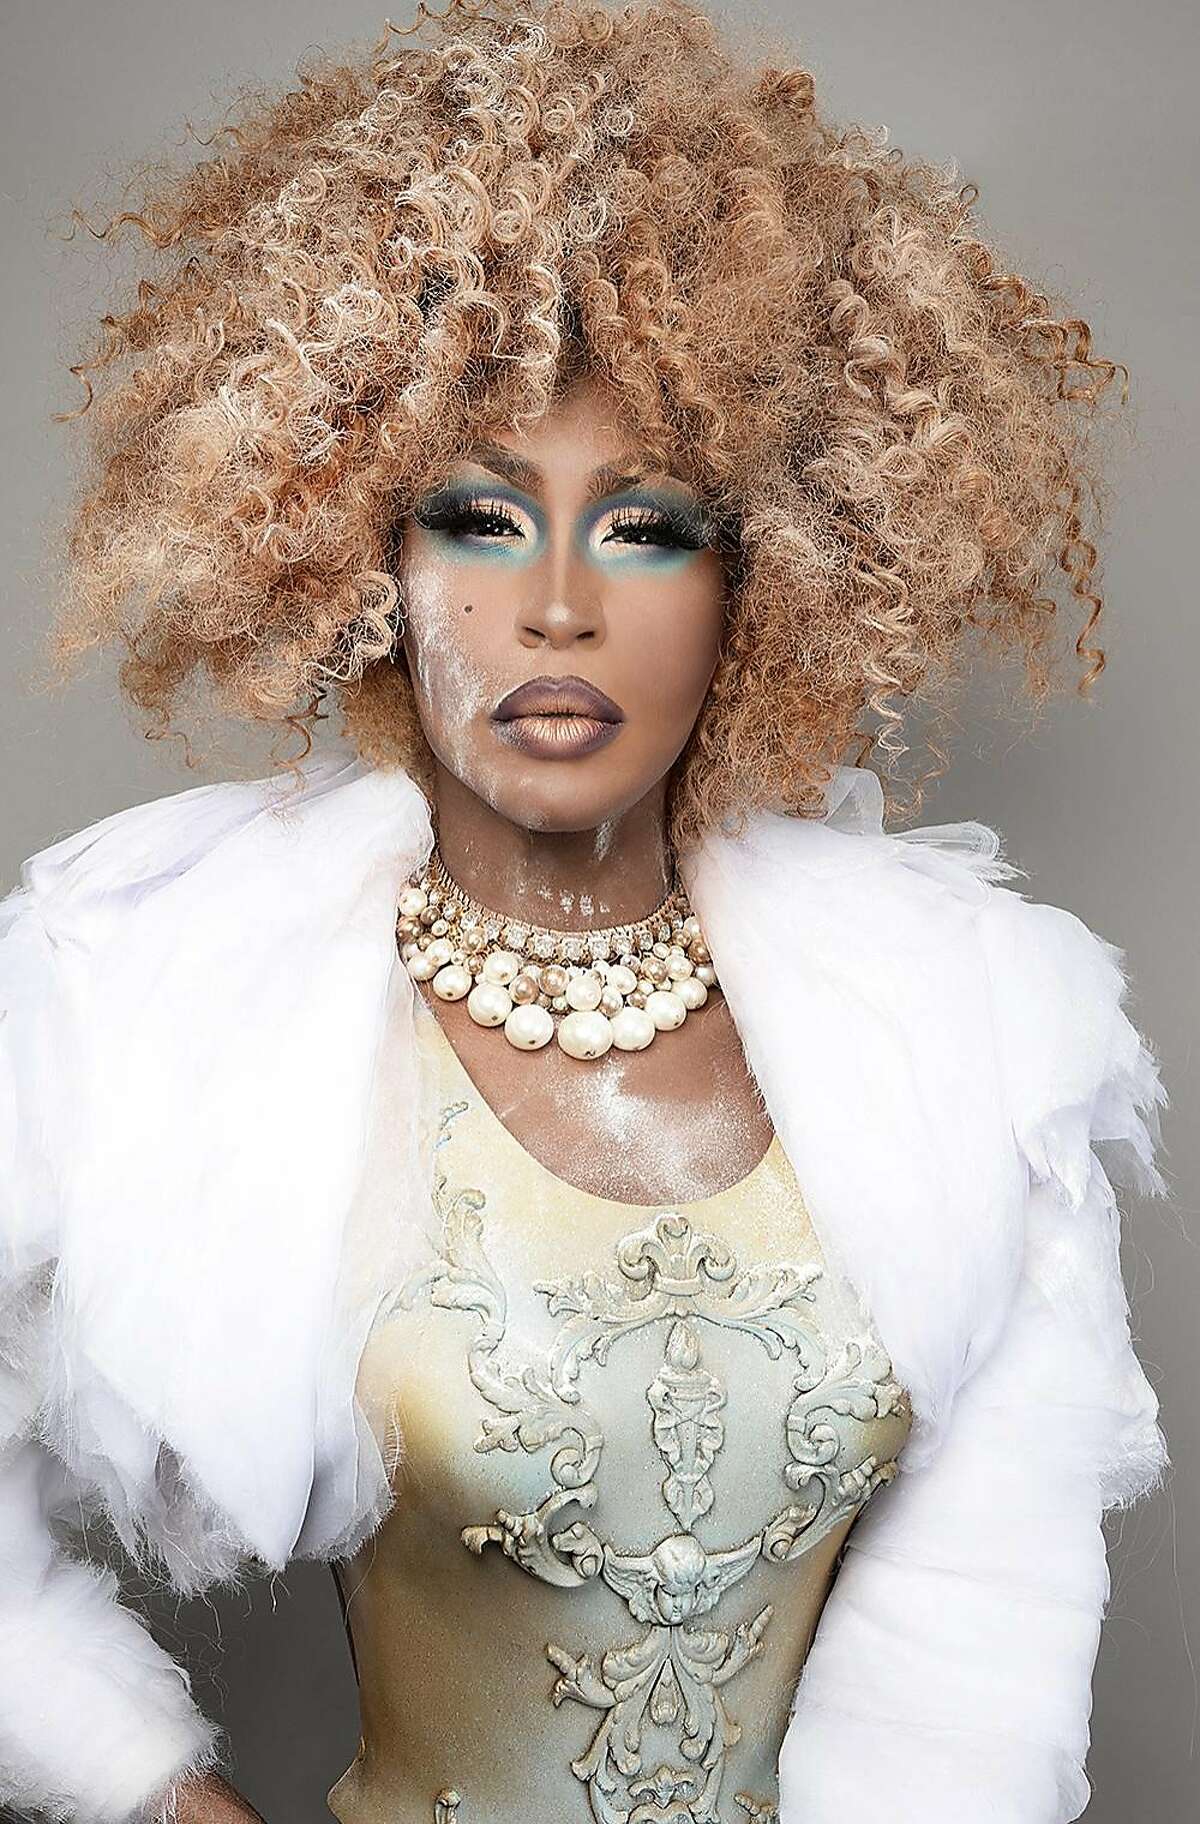 Shea Coulee is just one of the drag queens performing at "A Drag Queen Christmas: The Naughty Tour."